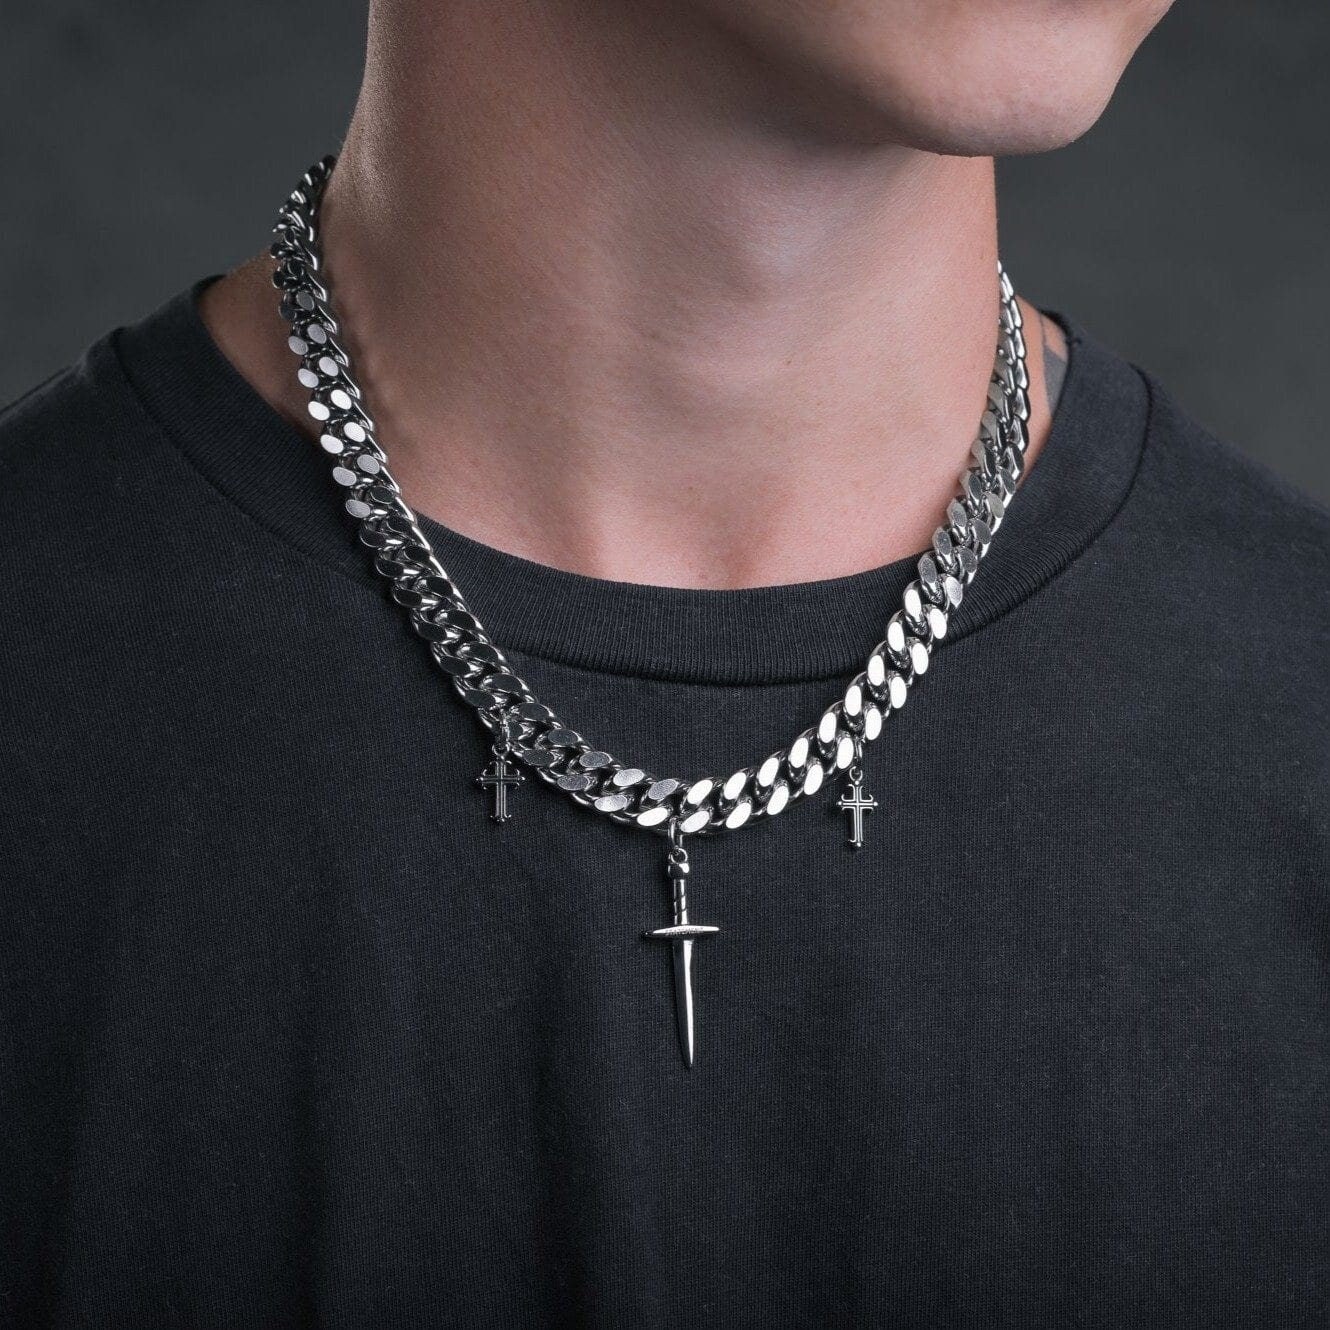 Kpop Goth Silver Color Heart Cross Pendant Chain Necklace For Women Men  Egirl Y2K Cool EMO Punk Aesthetic Grunge Jewelry Gifts